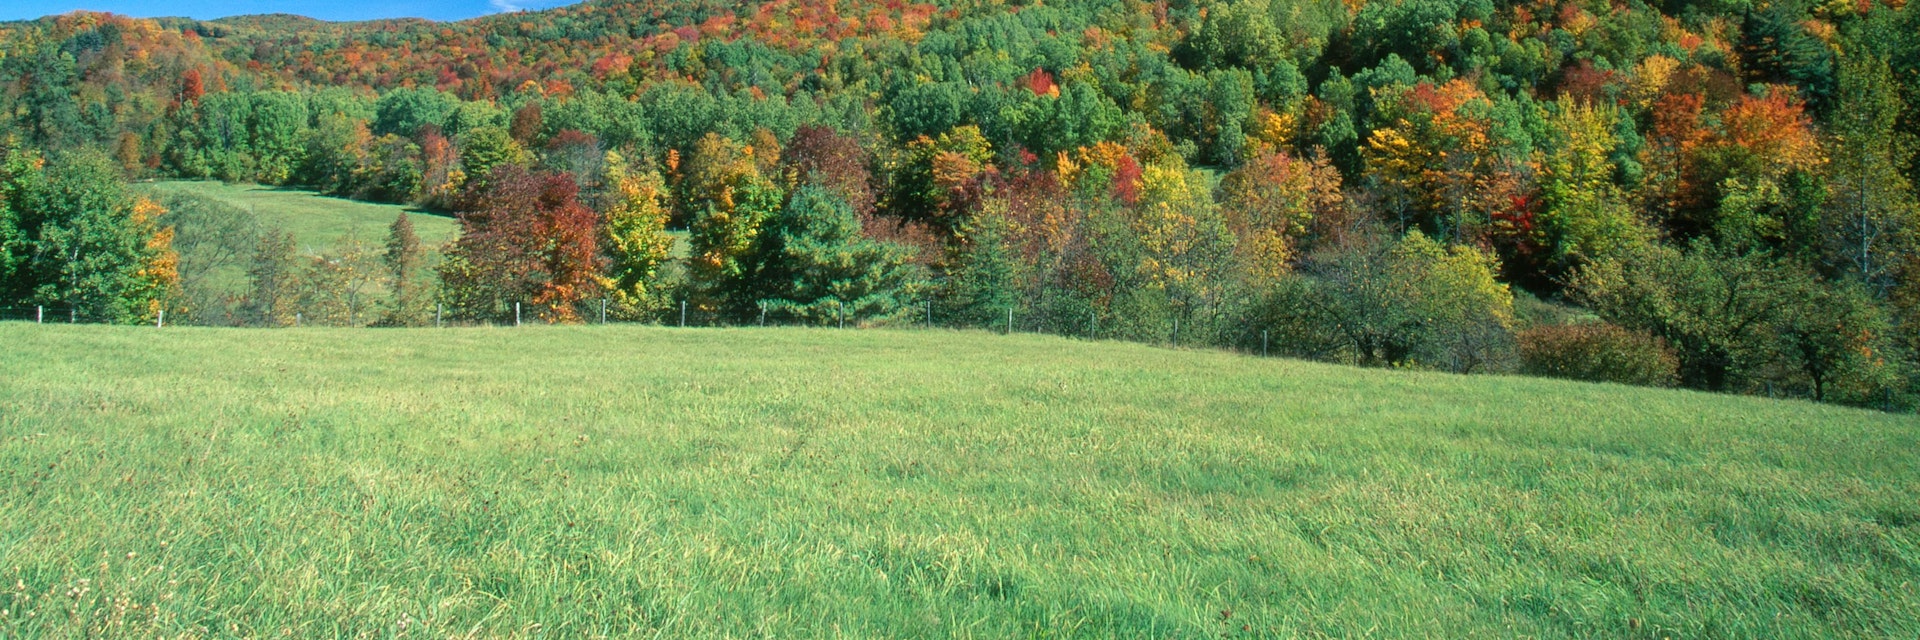 Eastern mixed deciduous forest in autumn, Green Mountain National Forest, Vermont.